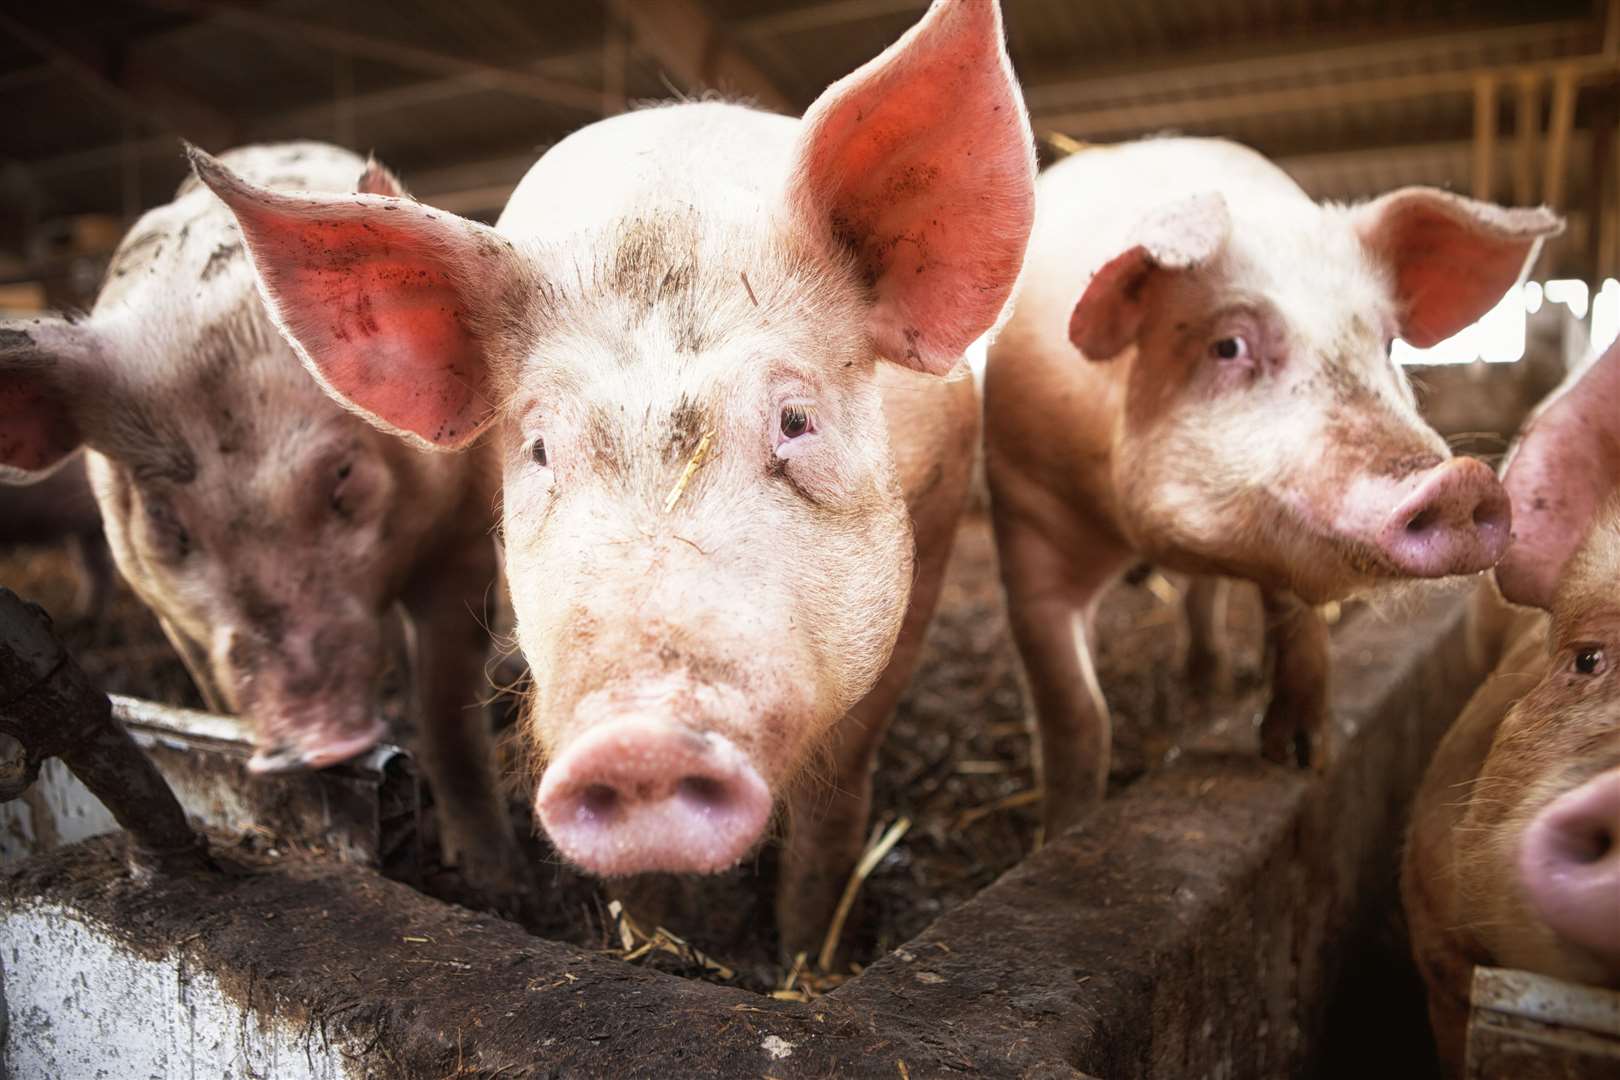 There have been cases of pigs being taken on flights Picture: iStock